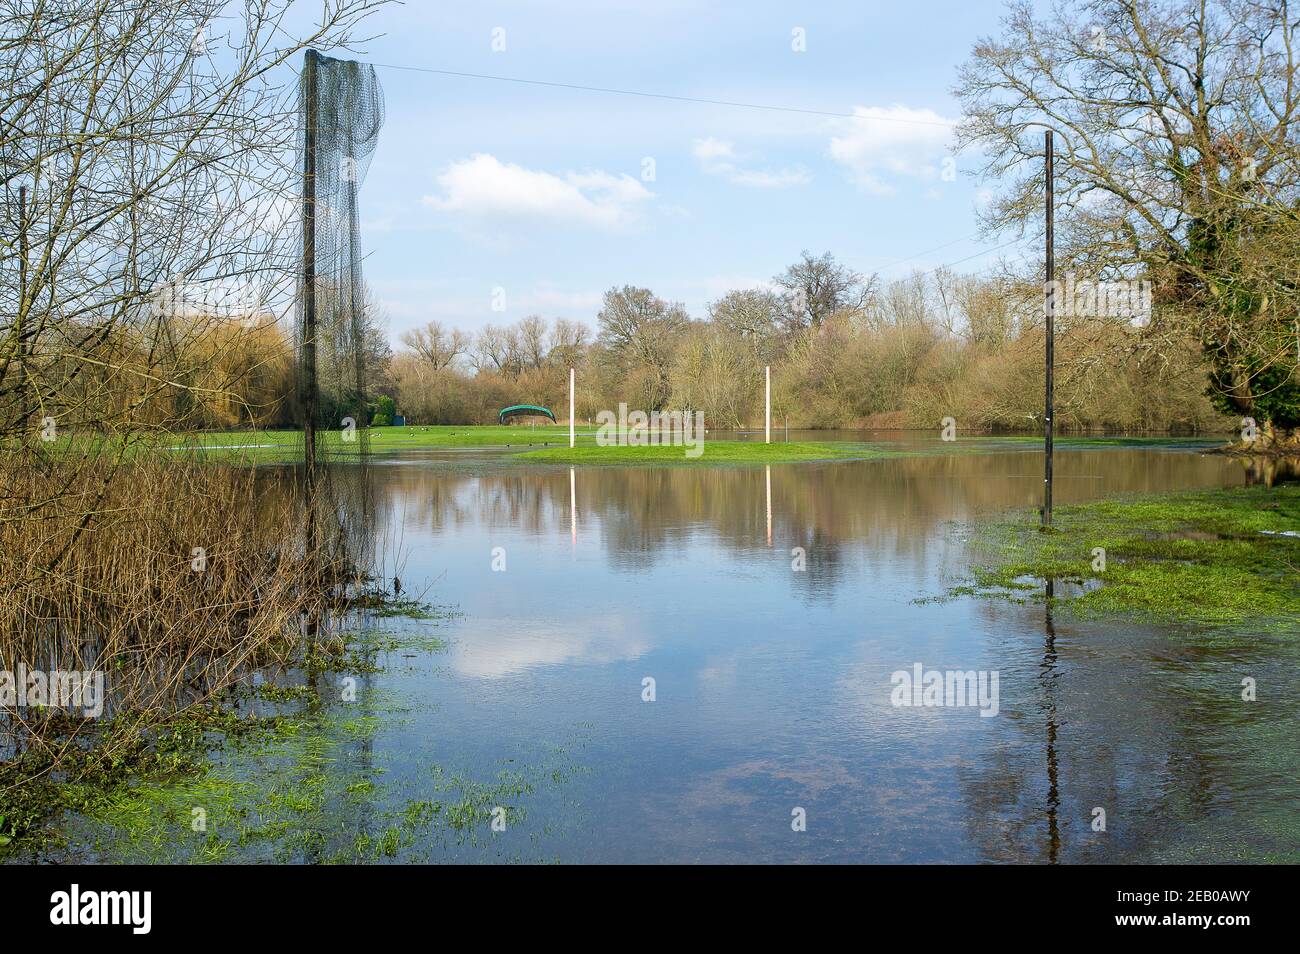 Denham, Buckinghamshire, UK. 11th February, 2021. The flooded driving range at the Buckinghamshire Golf Club. Following recent heavy rainfall the River Colne in Denham Country Park has burst its banks. Due to sustained freezing temperatures, both patches of snow and flooding remain in parts of the park. Credit: Maureen McLean/Alamy Live News Stock Photo